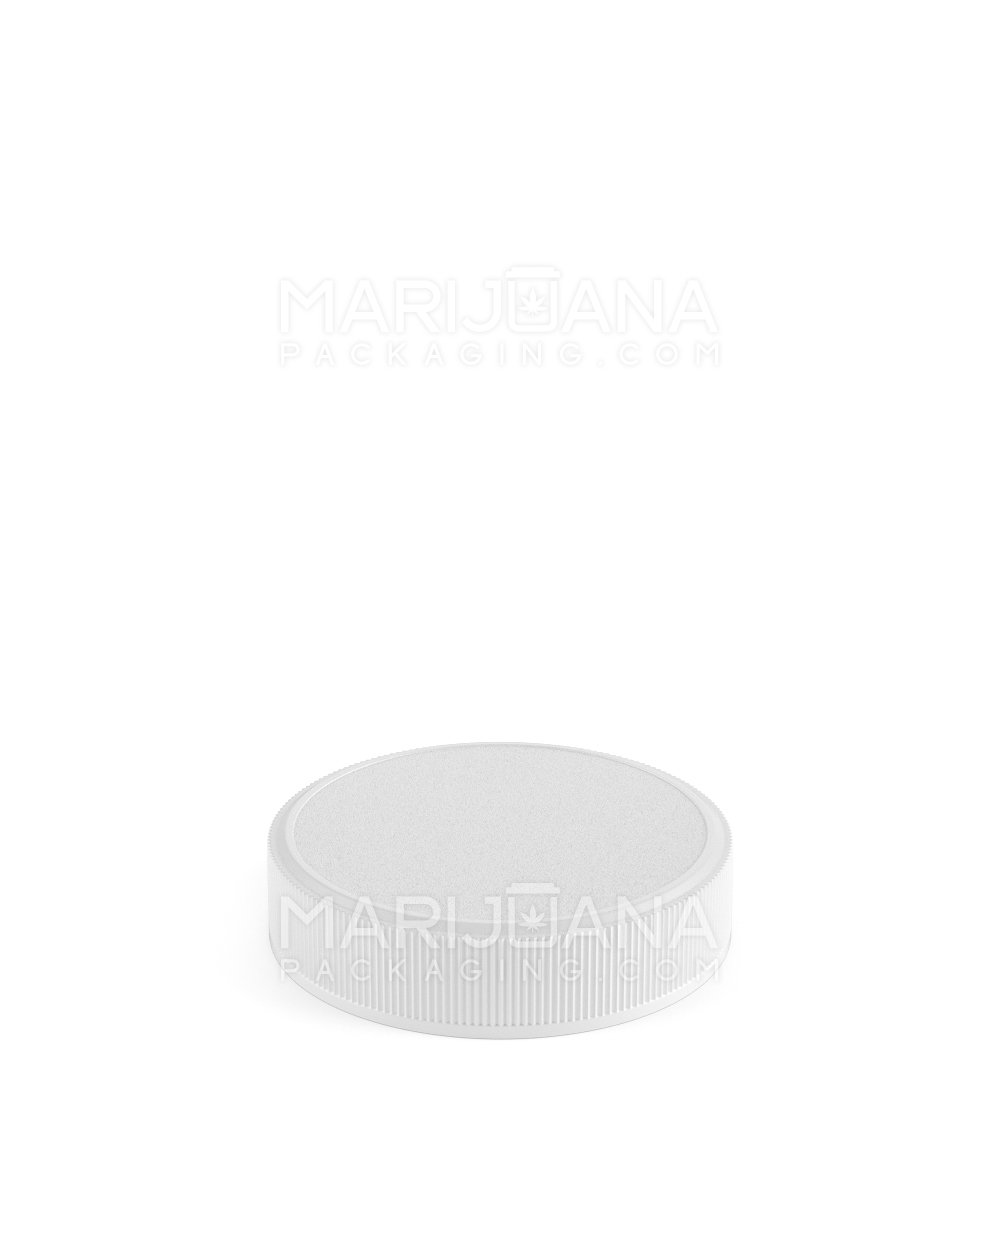 Straight Sided Clear Glass Jars with White Cap | 53mm - 2oz - 240 Count - 8